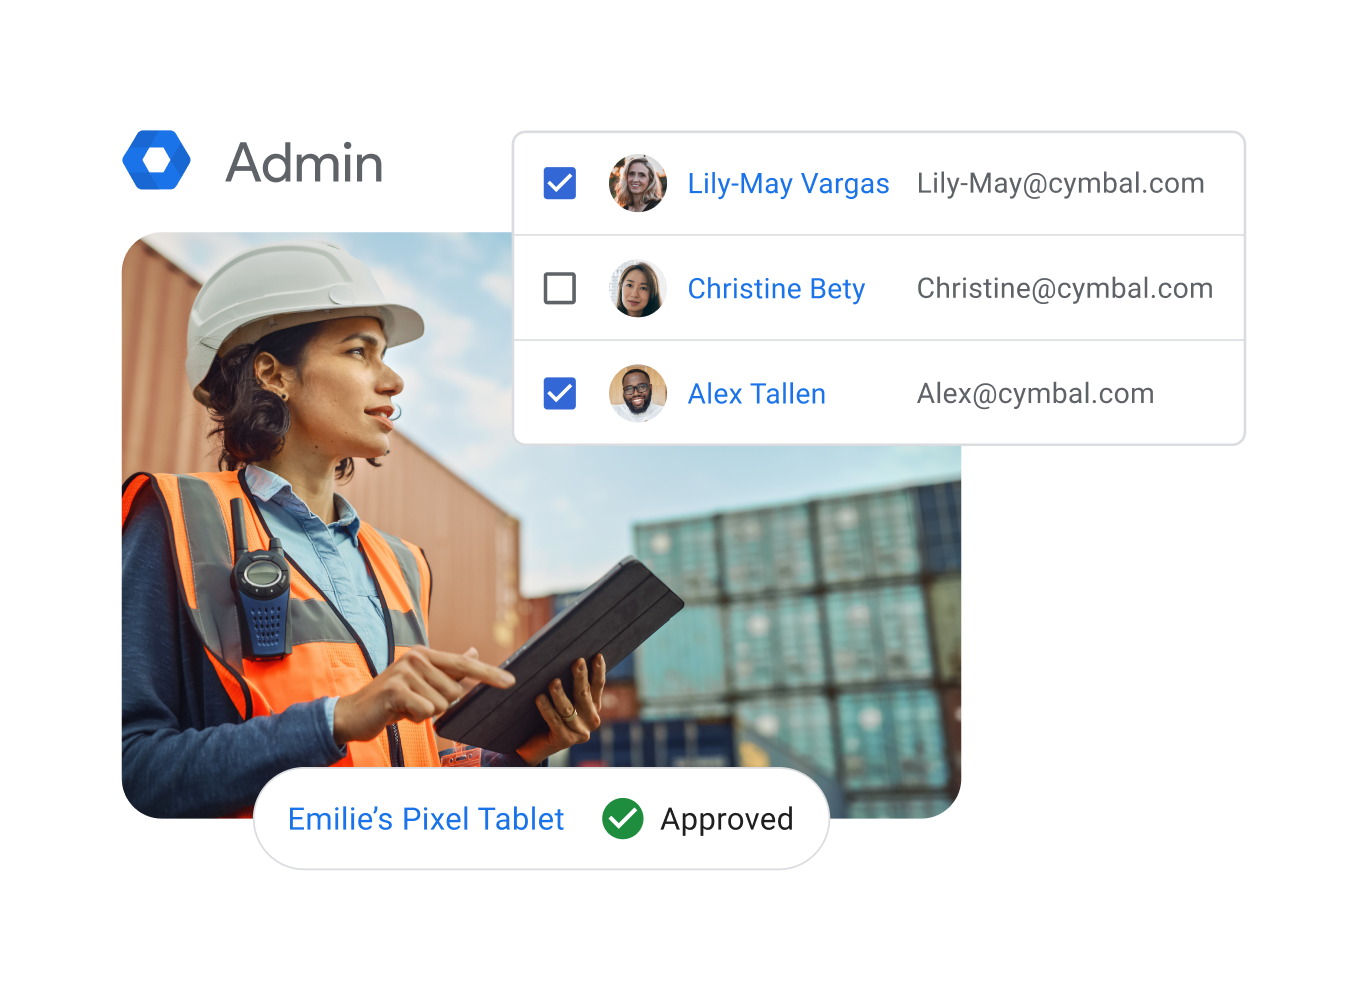 A woman on a tablet in a shipping yard, superimposed with Admin UI elements suggesting she is managing employee email access across devices.